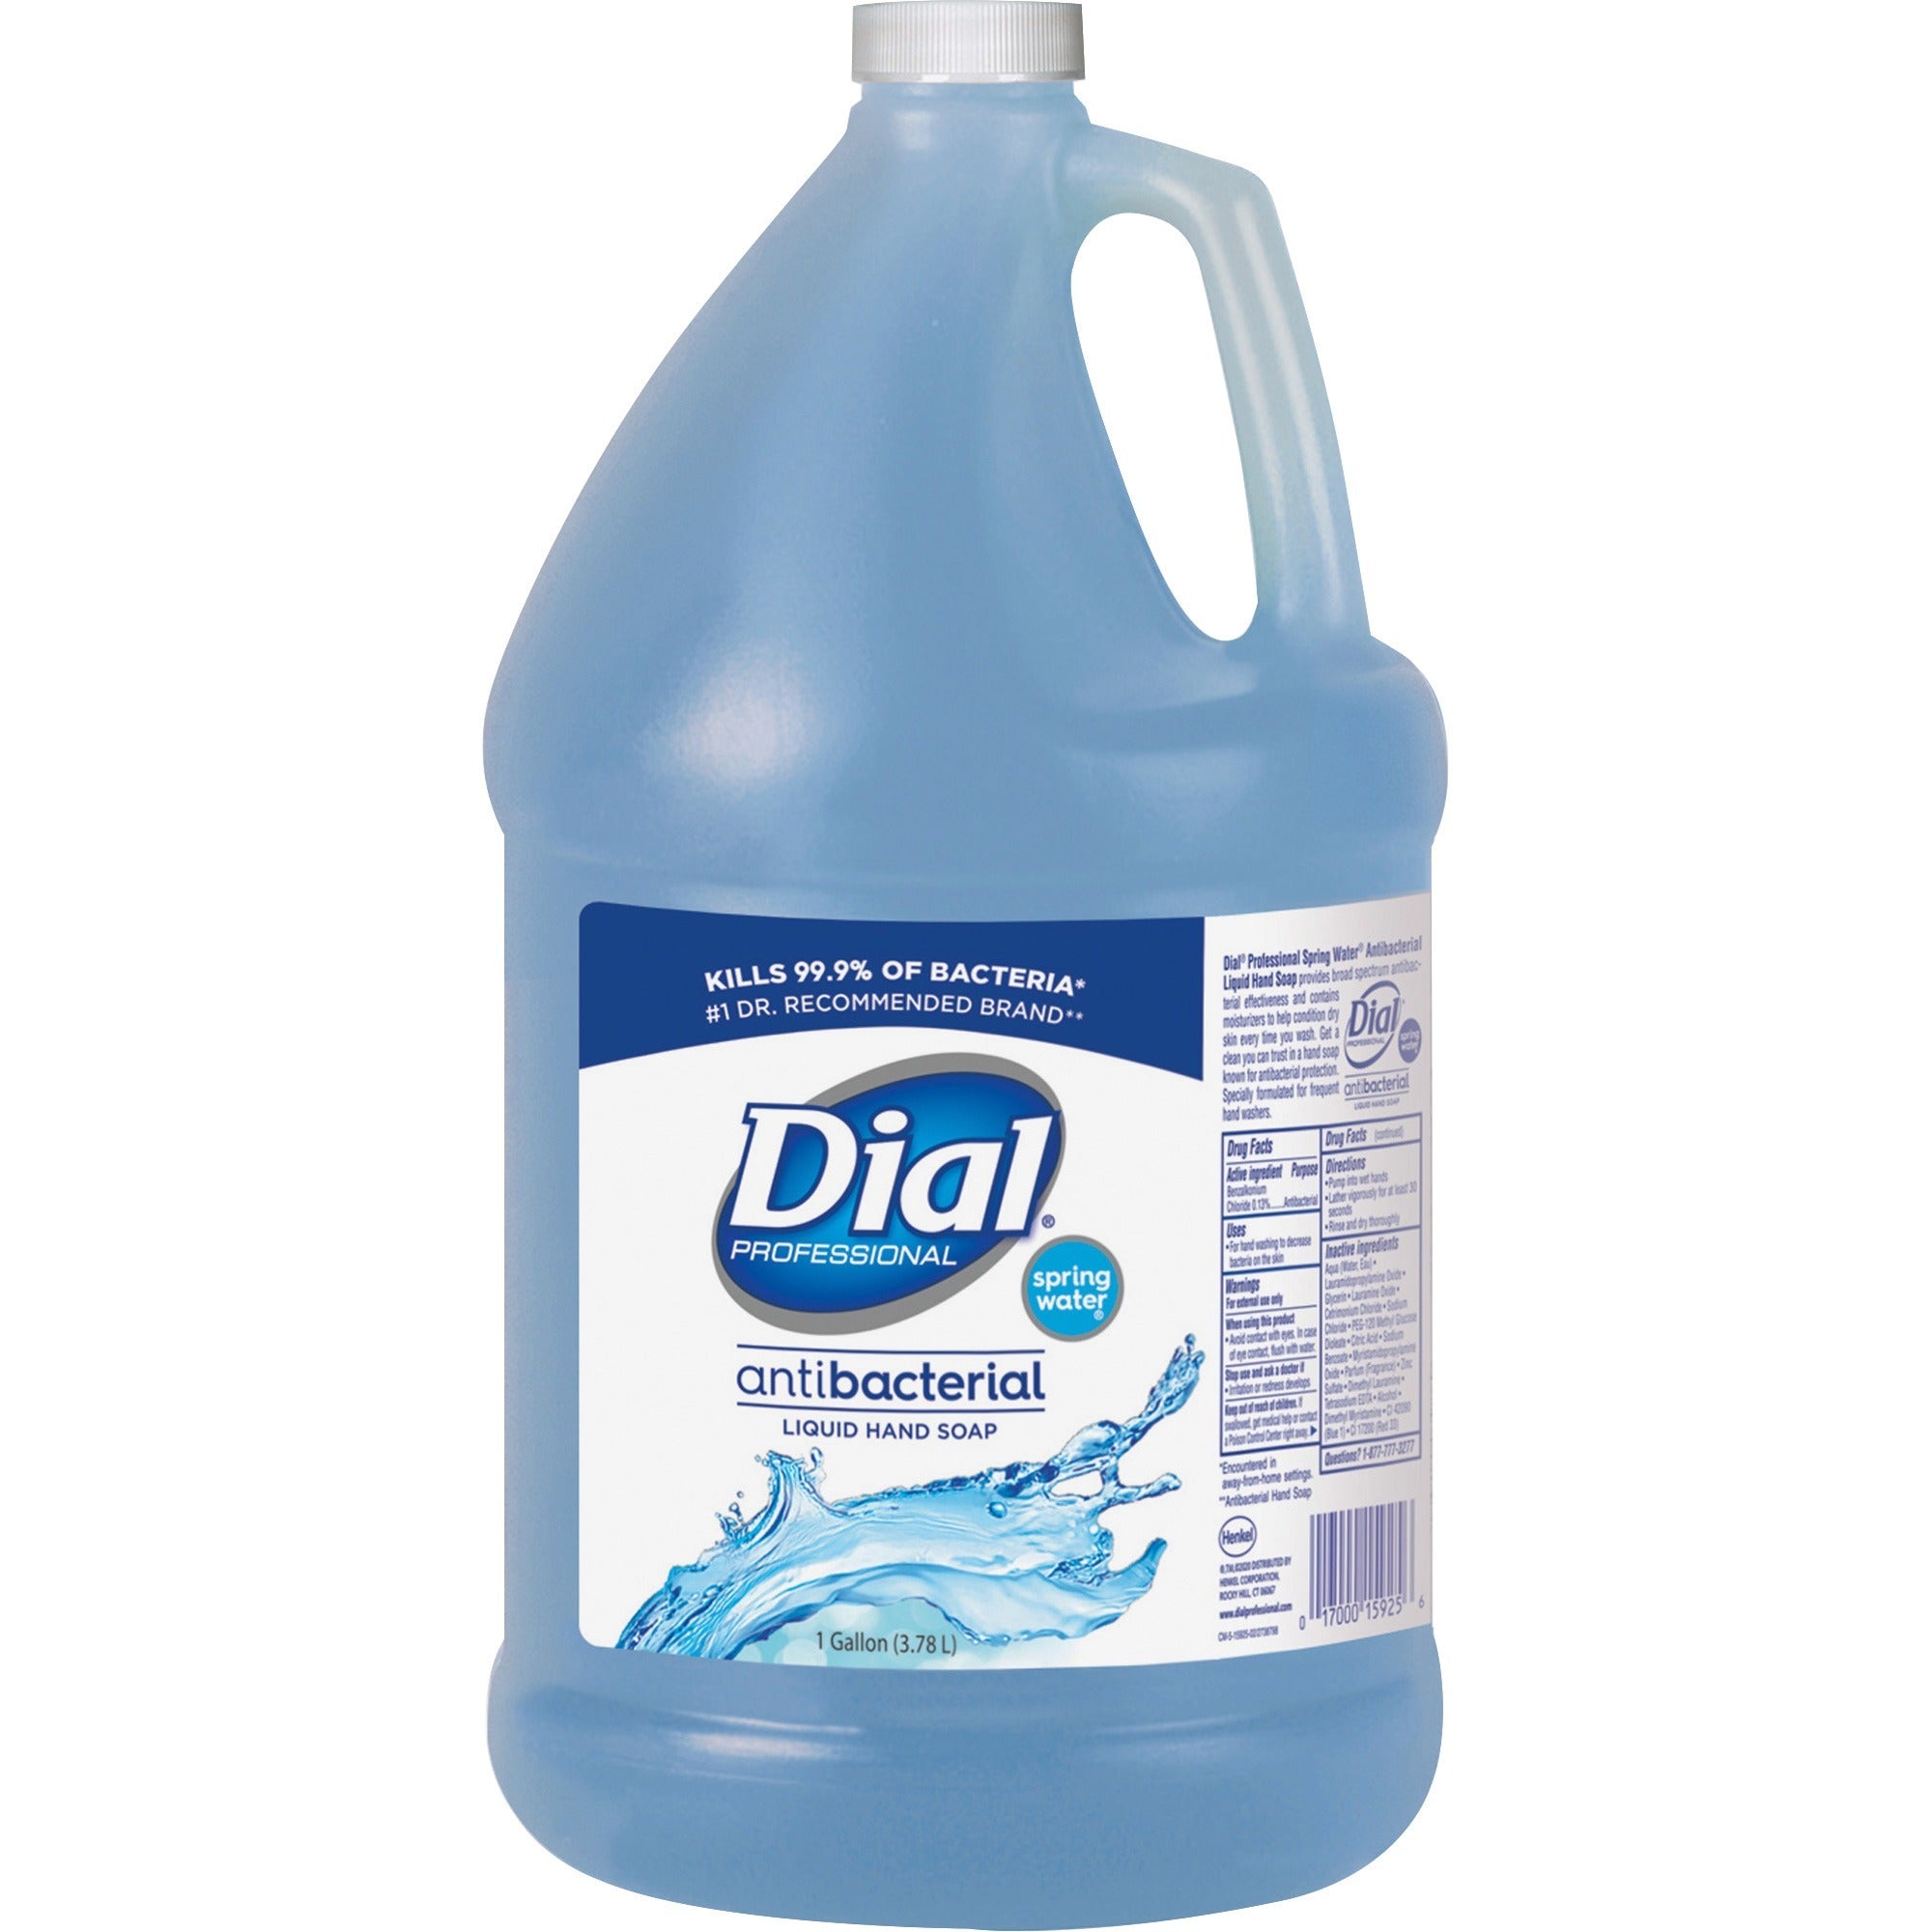 dial-spring-water-scent-liquid-hand-soap-spring-water-scentfor-1-gal-38-l-kill-germs-hand-moisturizing-blue-4-carton_dia15926ct - 2